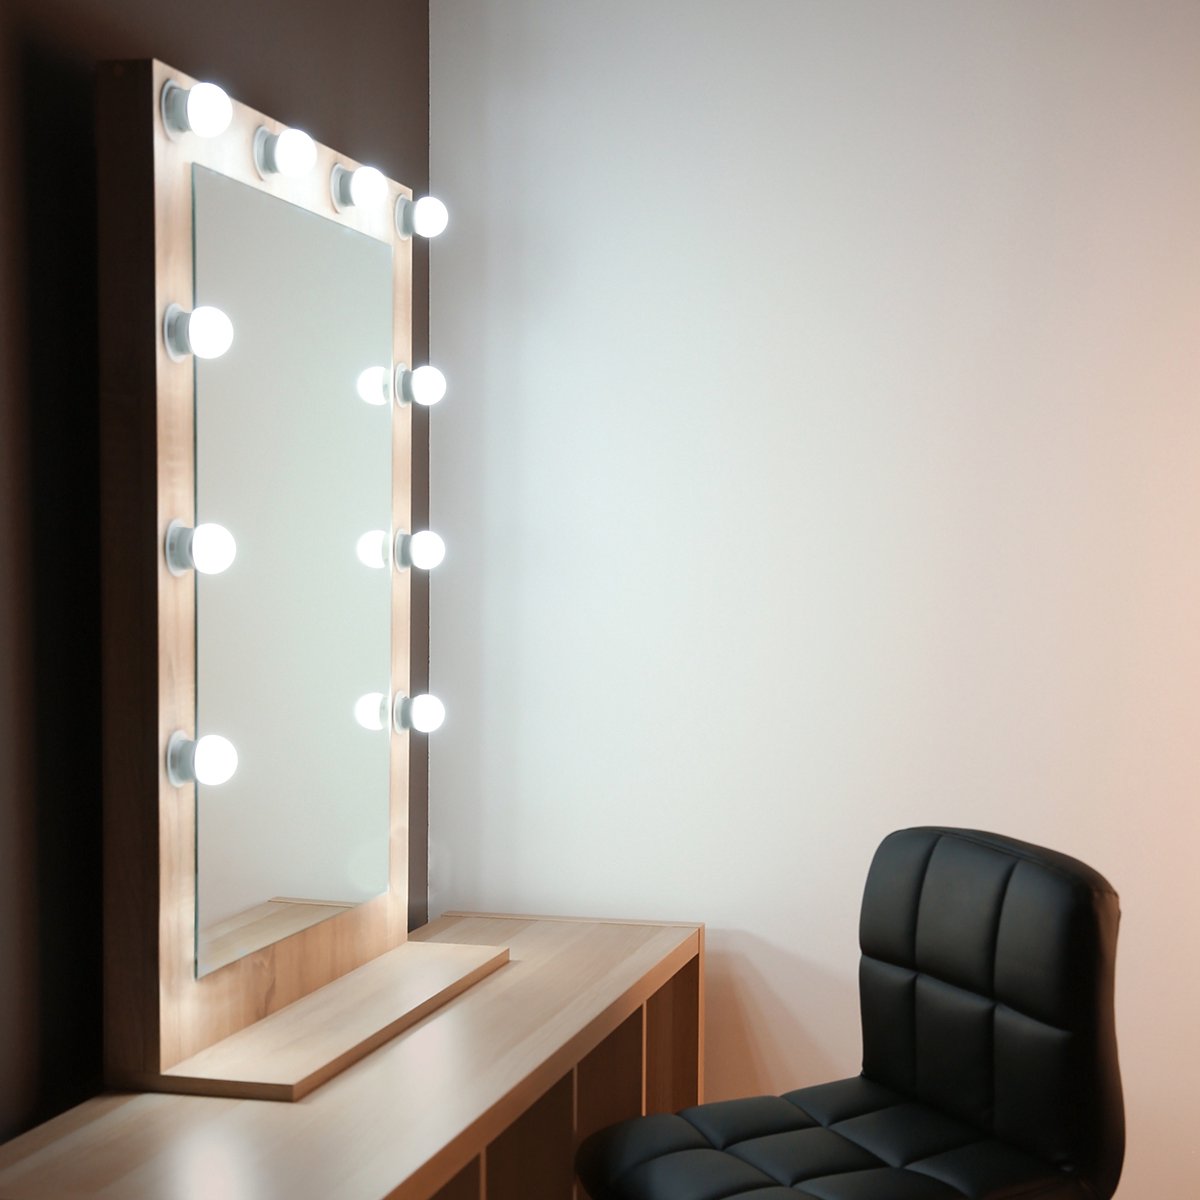 Miroir Ampoule Ronde Chaîne Lumineuse Dimmable Maquillage Coiffeuse